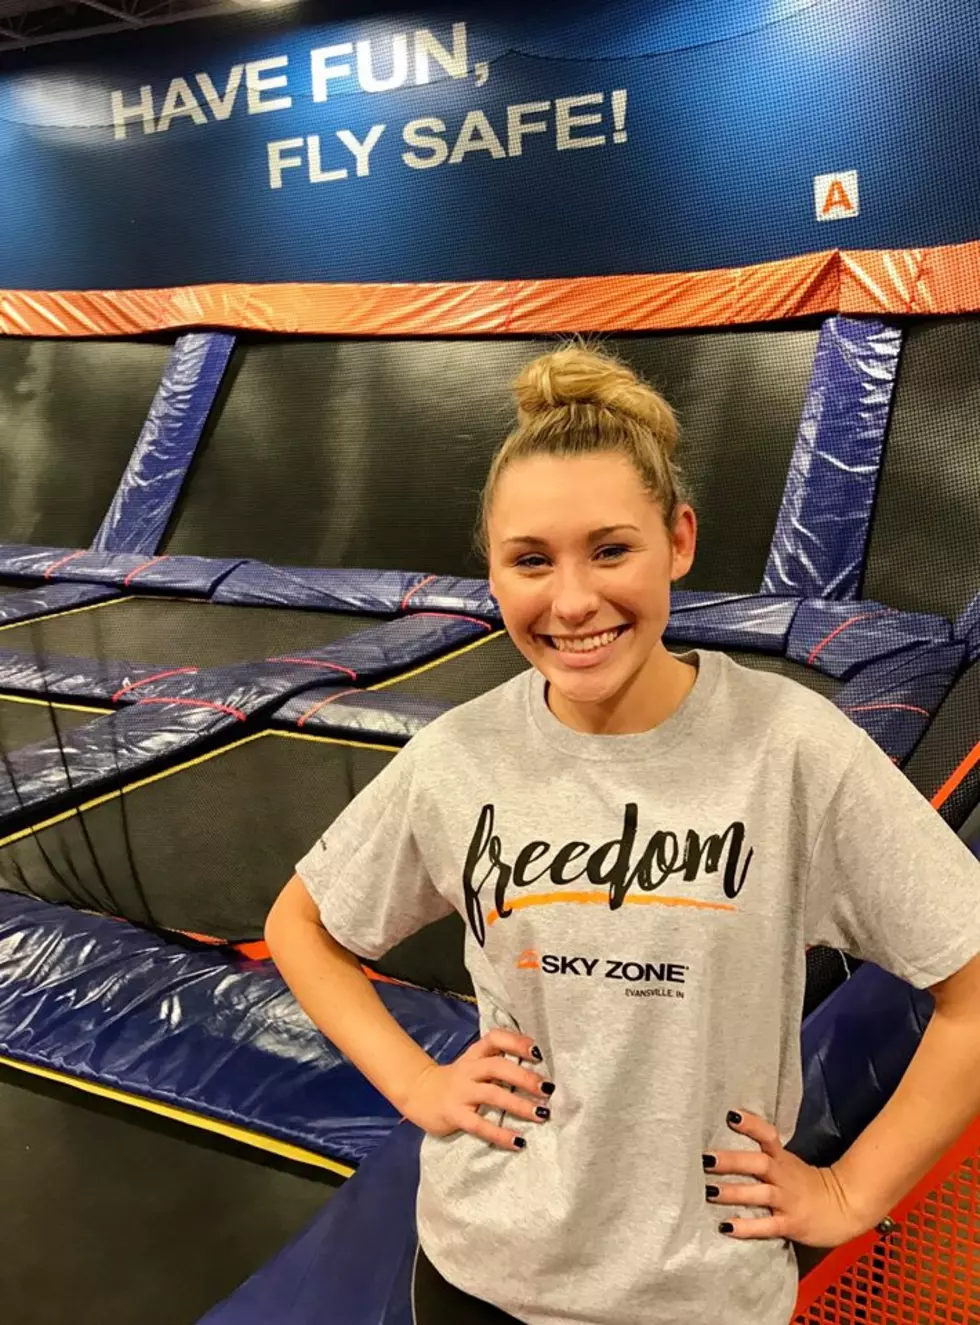 Pay Your Age at Sky Zone!